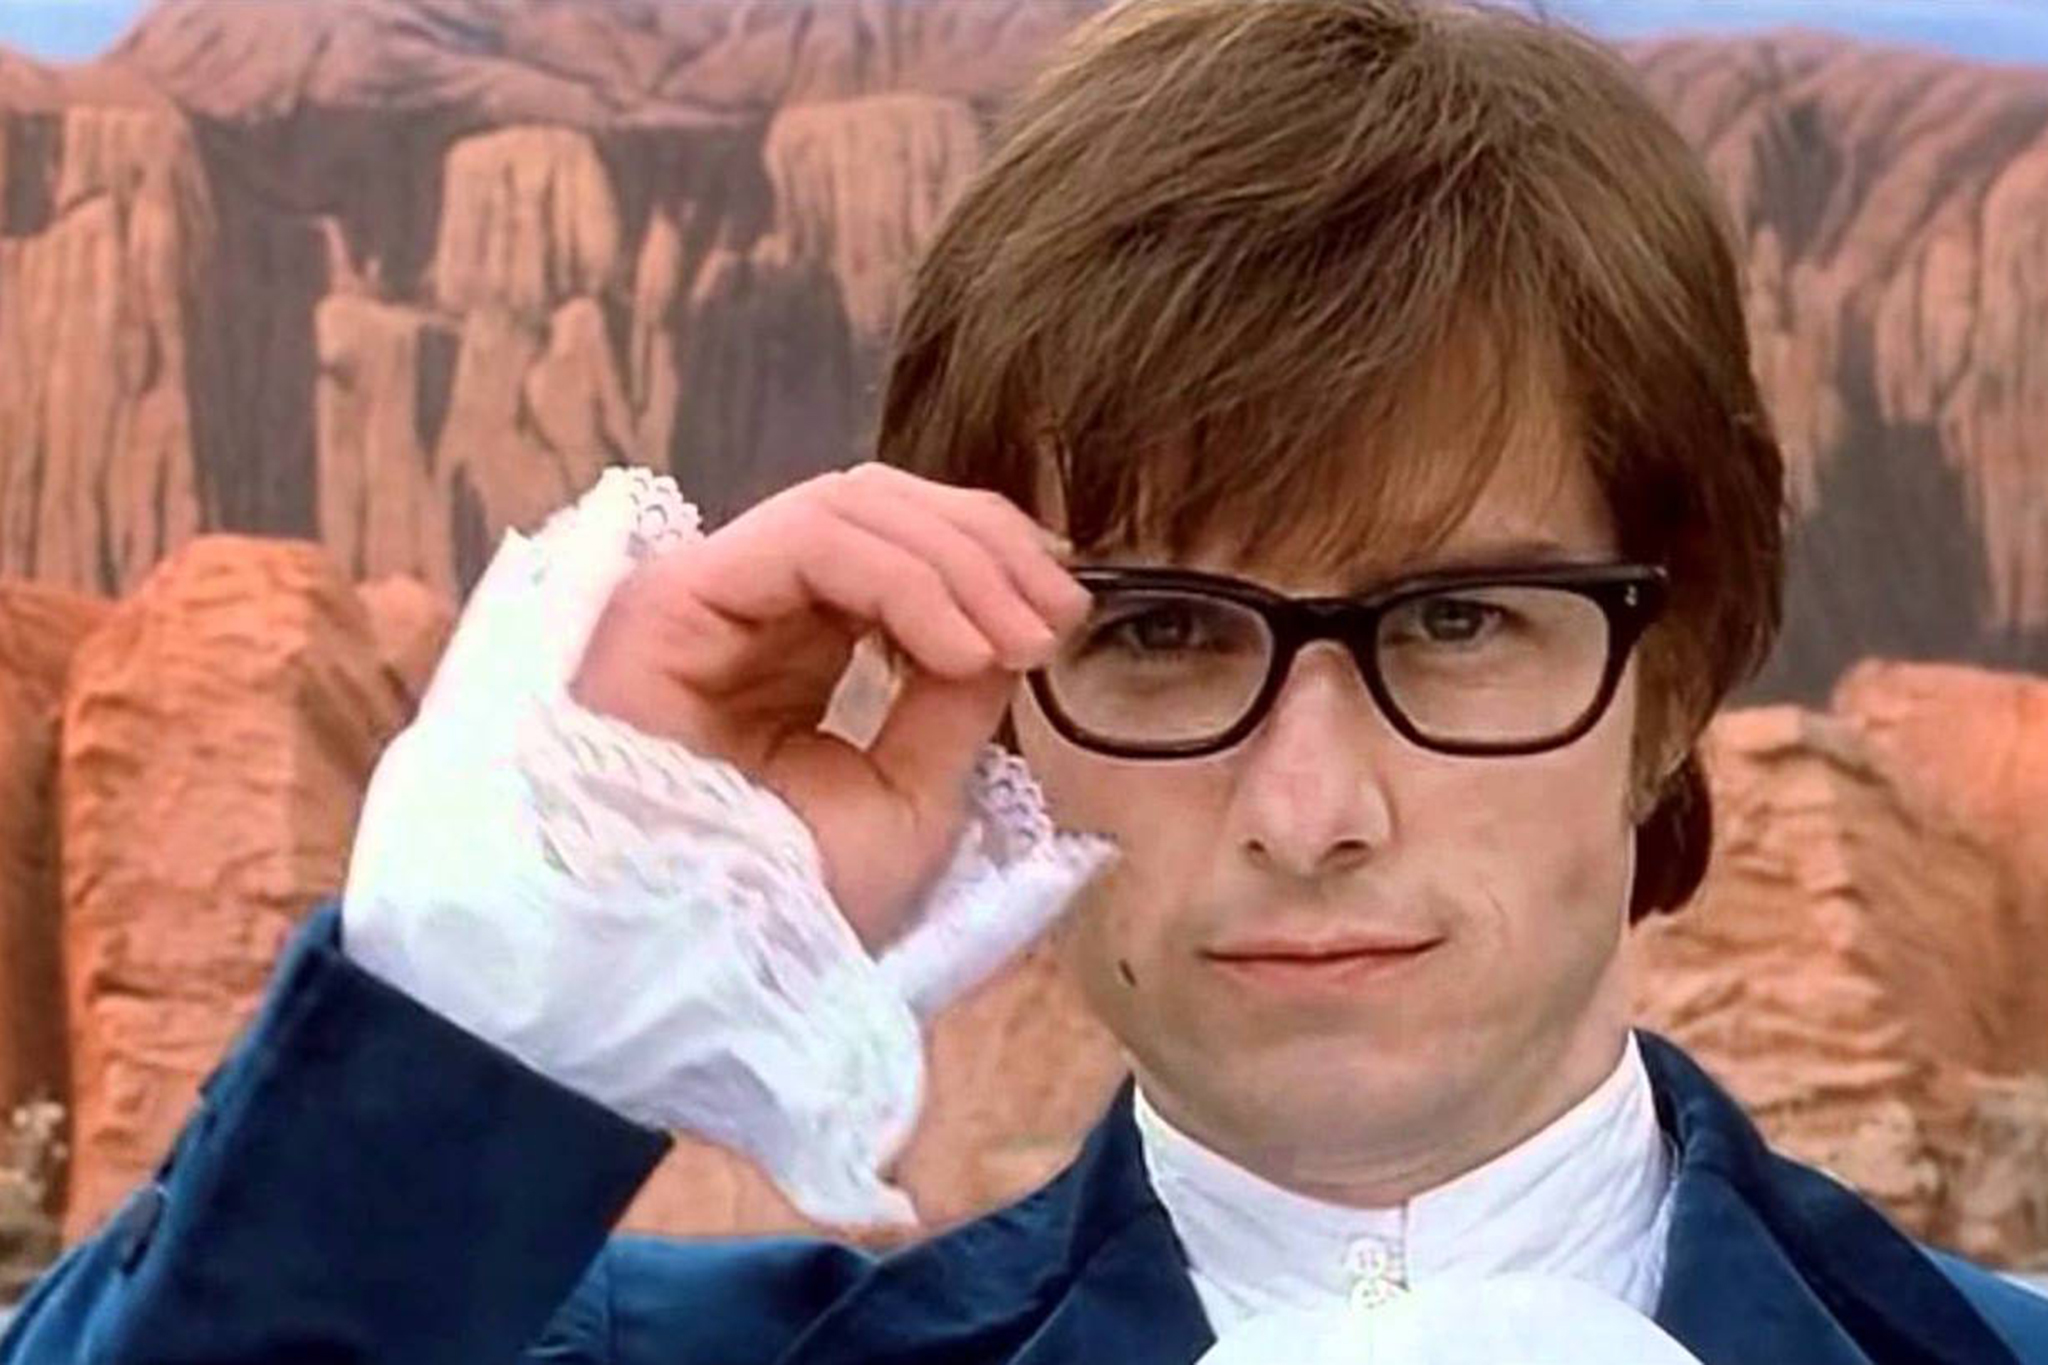 Austin Powers in Goldmember 2002, directed by Jay Roach